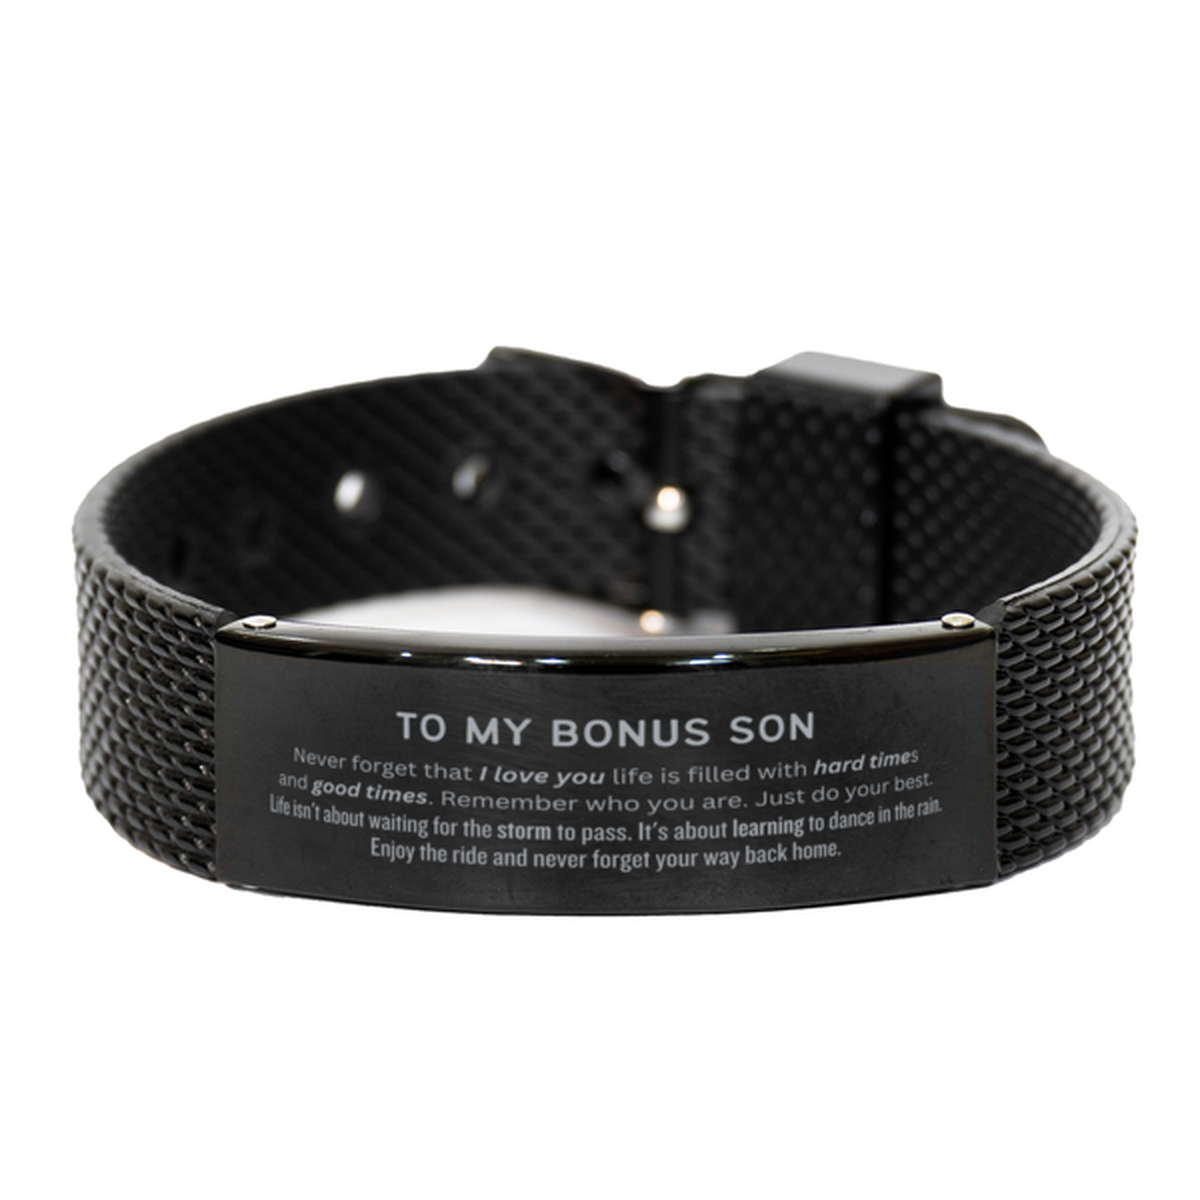 Christmas Bonus Son Black Shark Mesh Bracelet Gifts, To My Bonus Son Birthday Thank You Gifts For Bonus Son, Graduation Unique Gifts For Bonus Son To My Bonus Son Never forget that I love you life is filled with hard times and good times. Remember who you